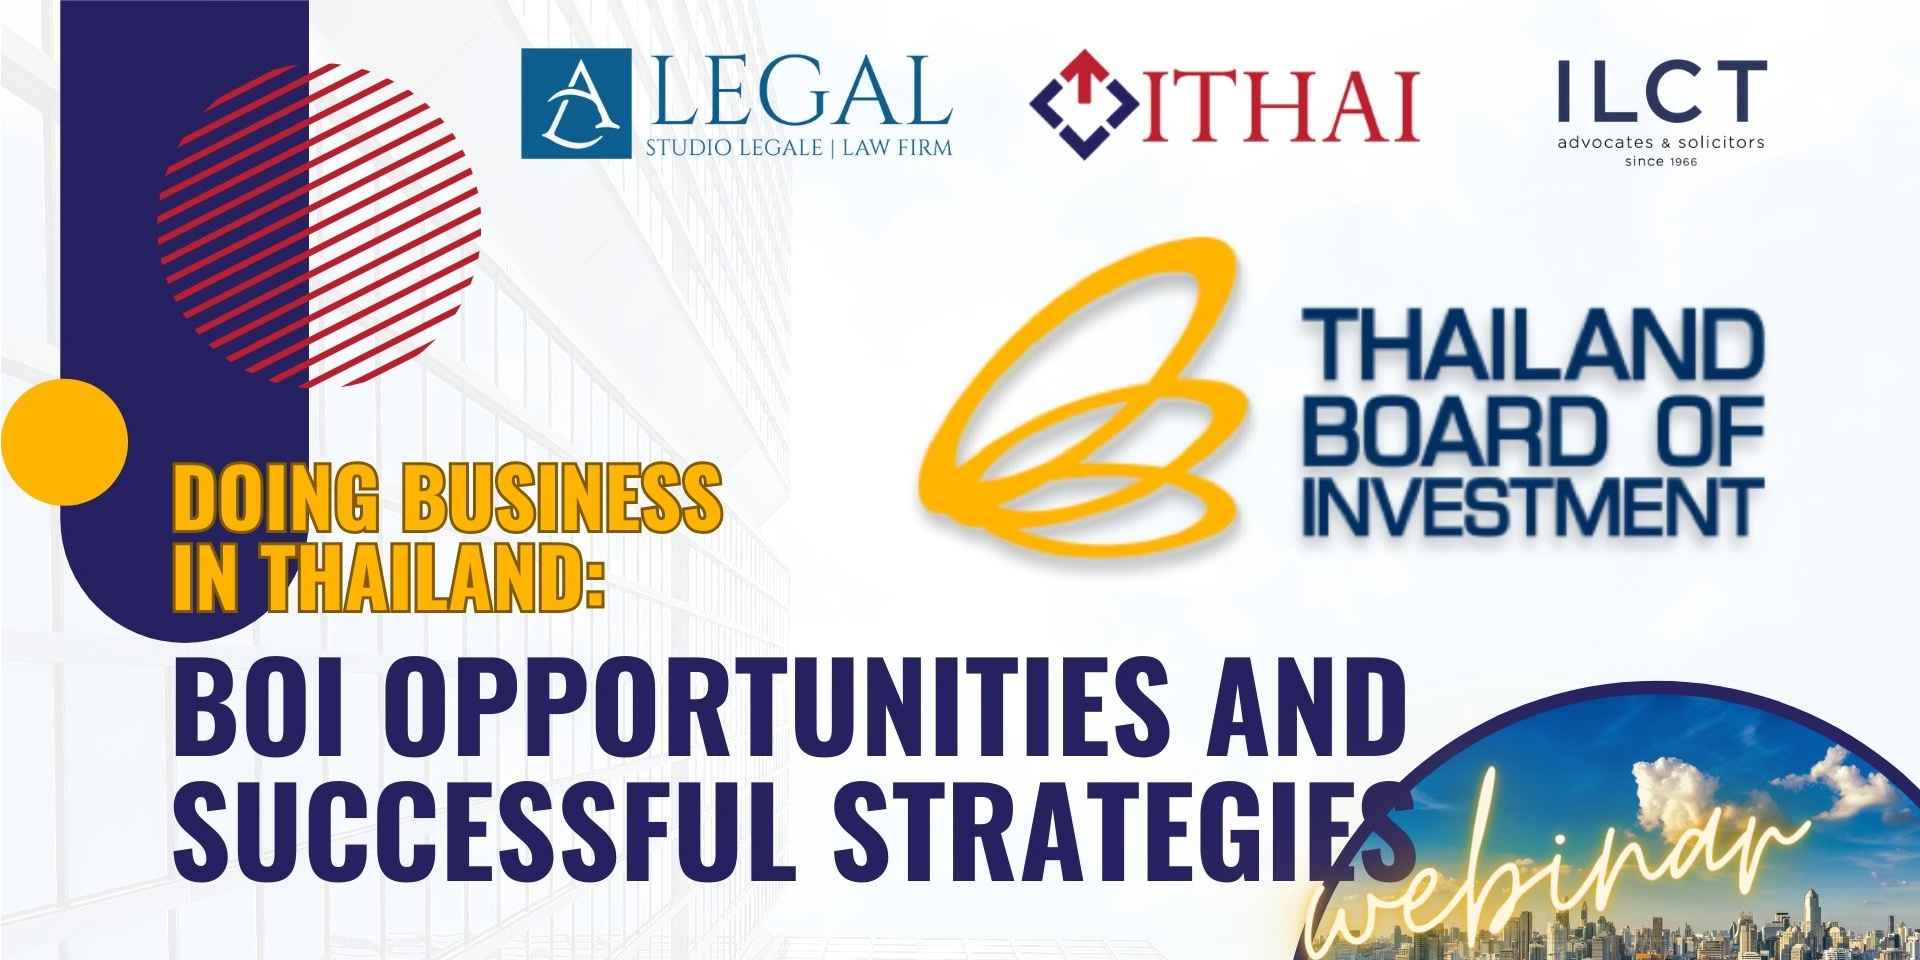 thumbnails "Doing Business in Thailand: BOI Opportunities and Successful Strategies"